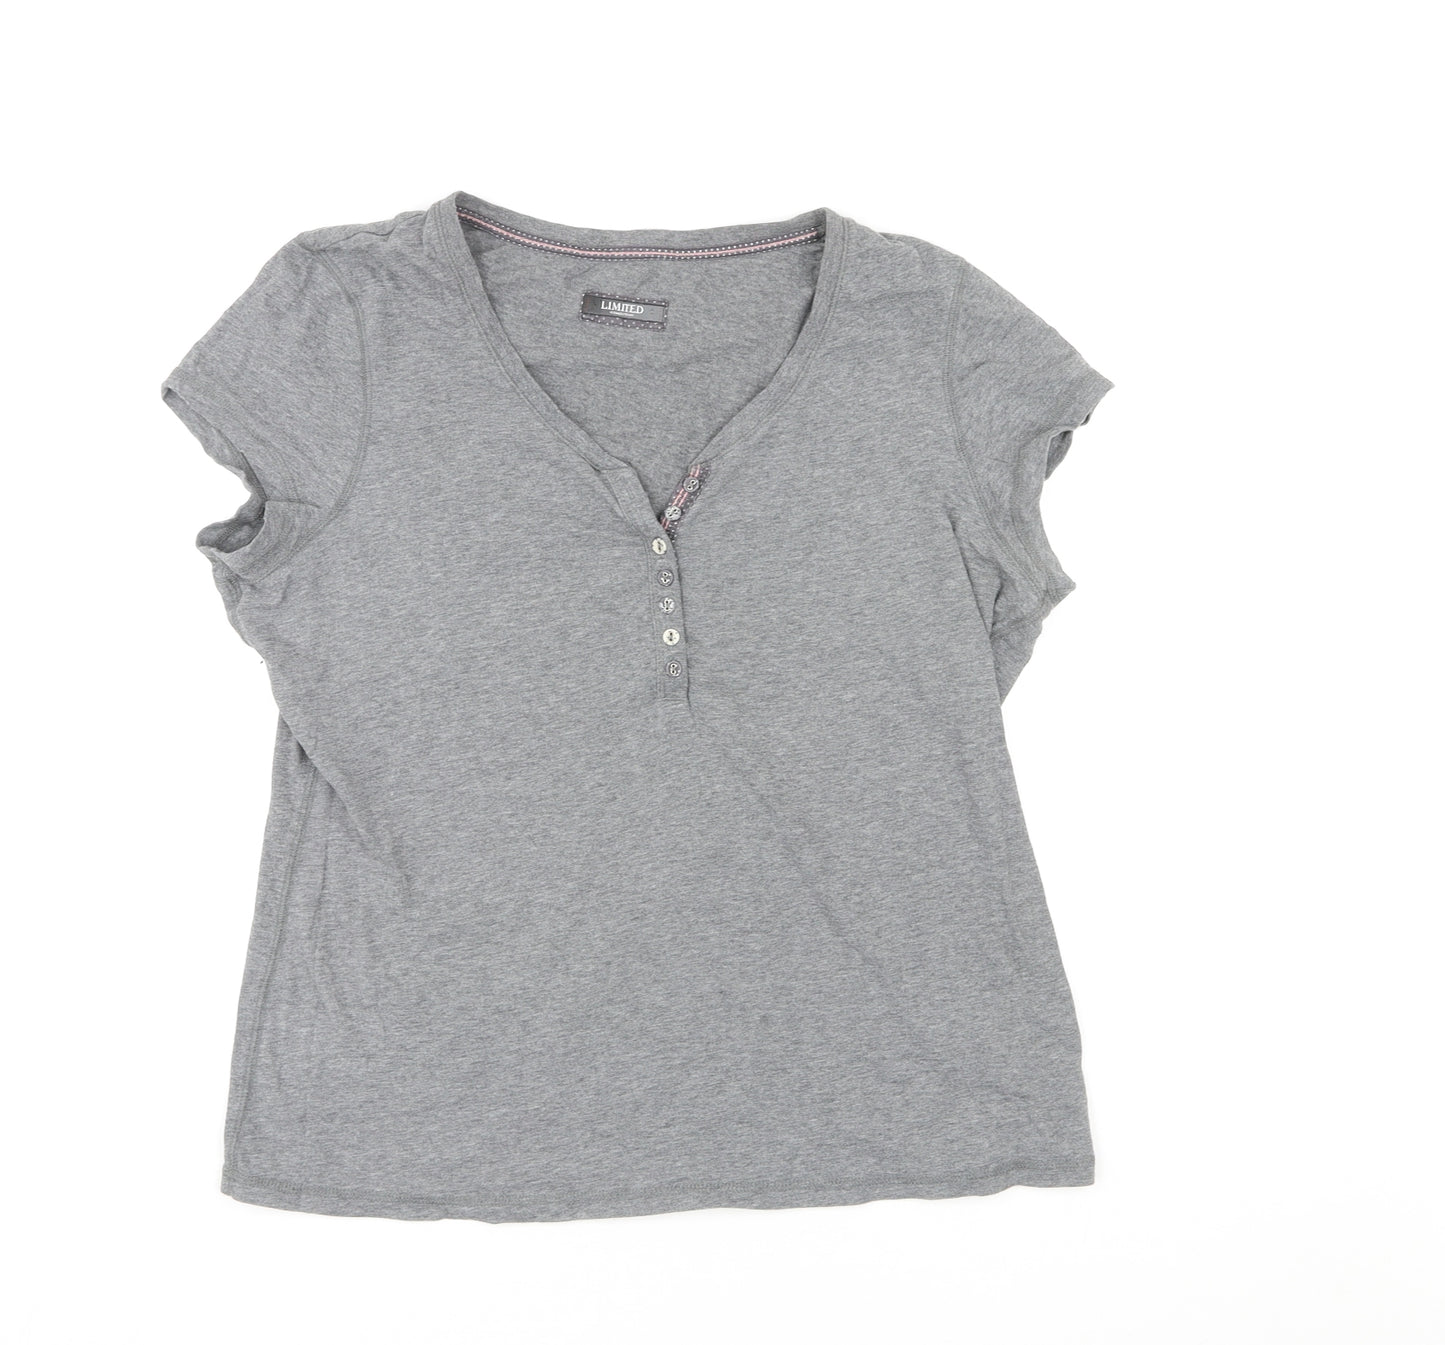 Limited Collection Womens Grey Cotton Basic T-Shirt Size 16 V-Neck